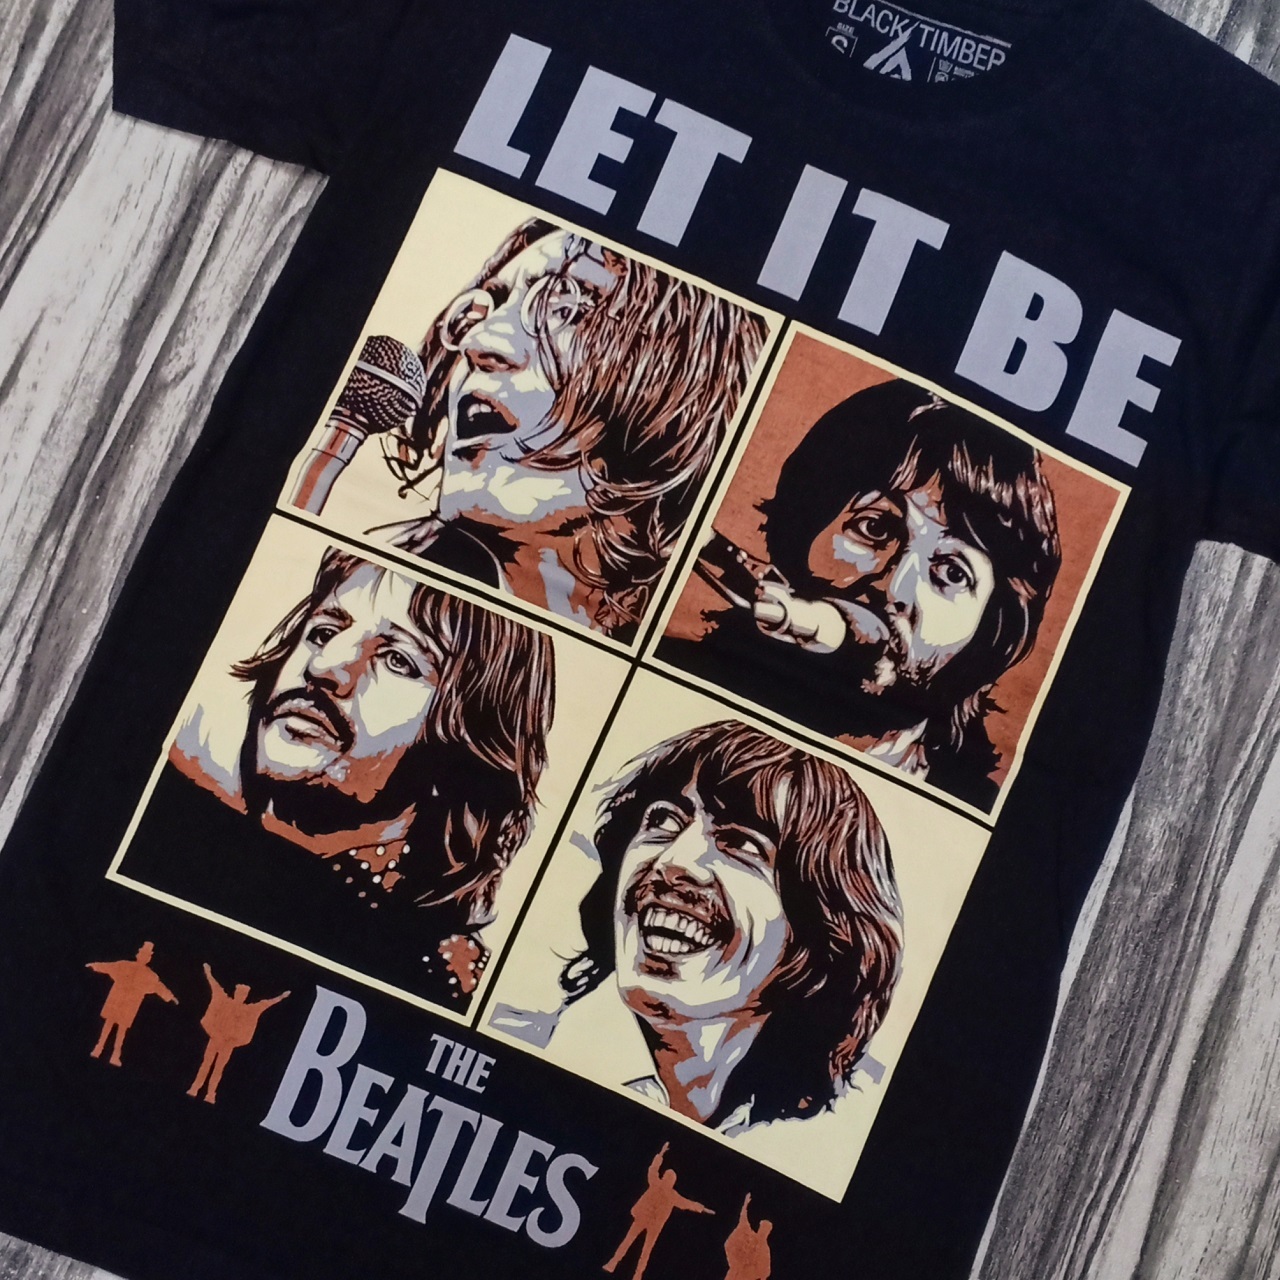 BT44 THE BEATLES LET BE LIMITED BLACK TIMBER COTTON ROCK BAND T- SHIRT PREMIUM GRADE BLACK TIMBER NEW TYPE SYSTEM MOAI SPEED HIGH SILK SCREEN COLLECTABLE T-SHIRT STORE MALAYSIA